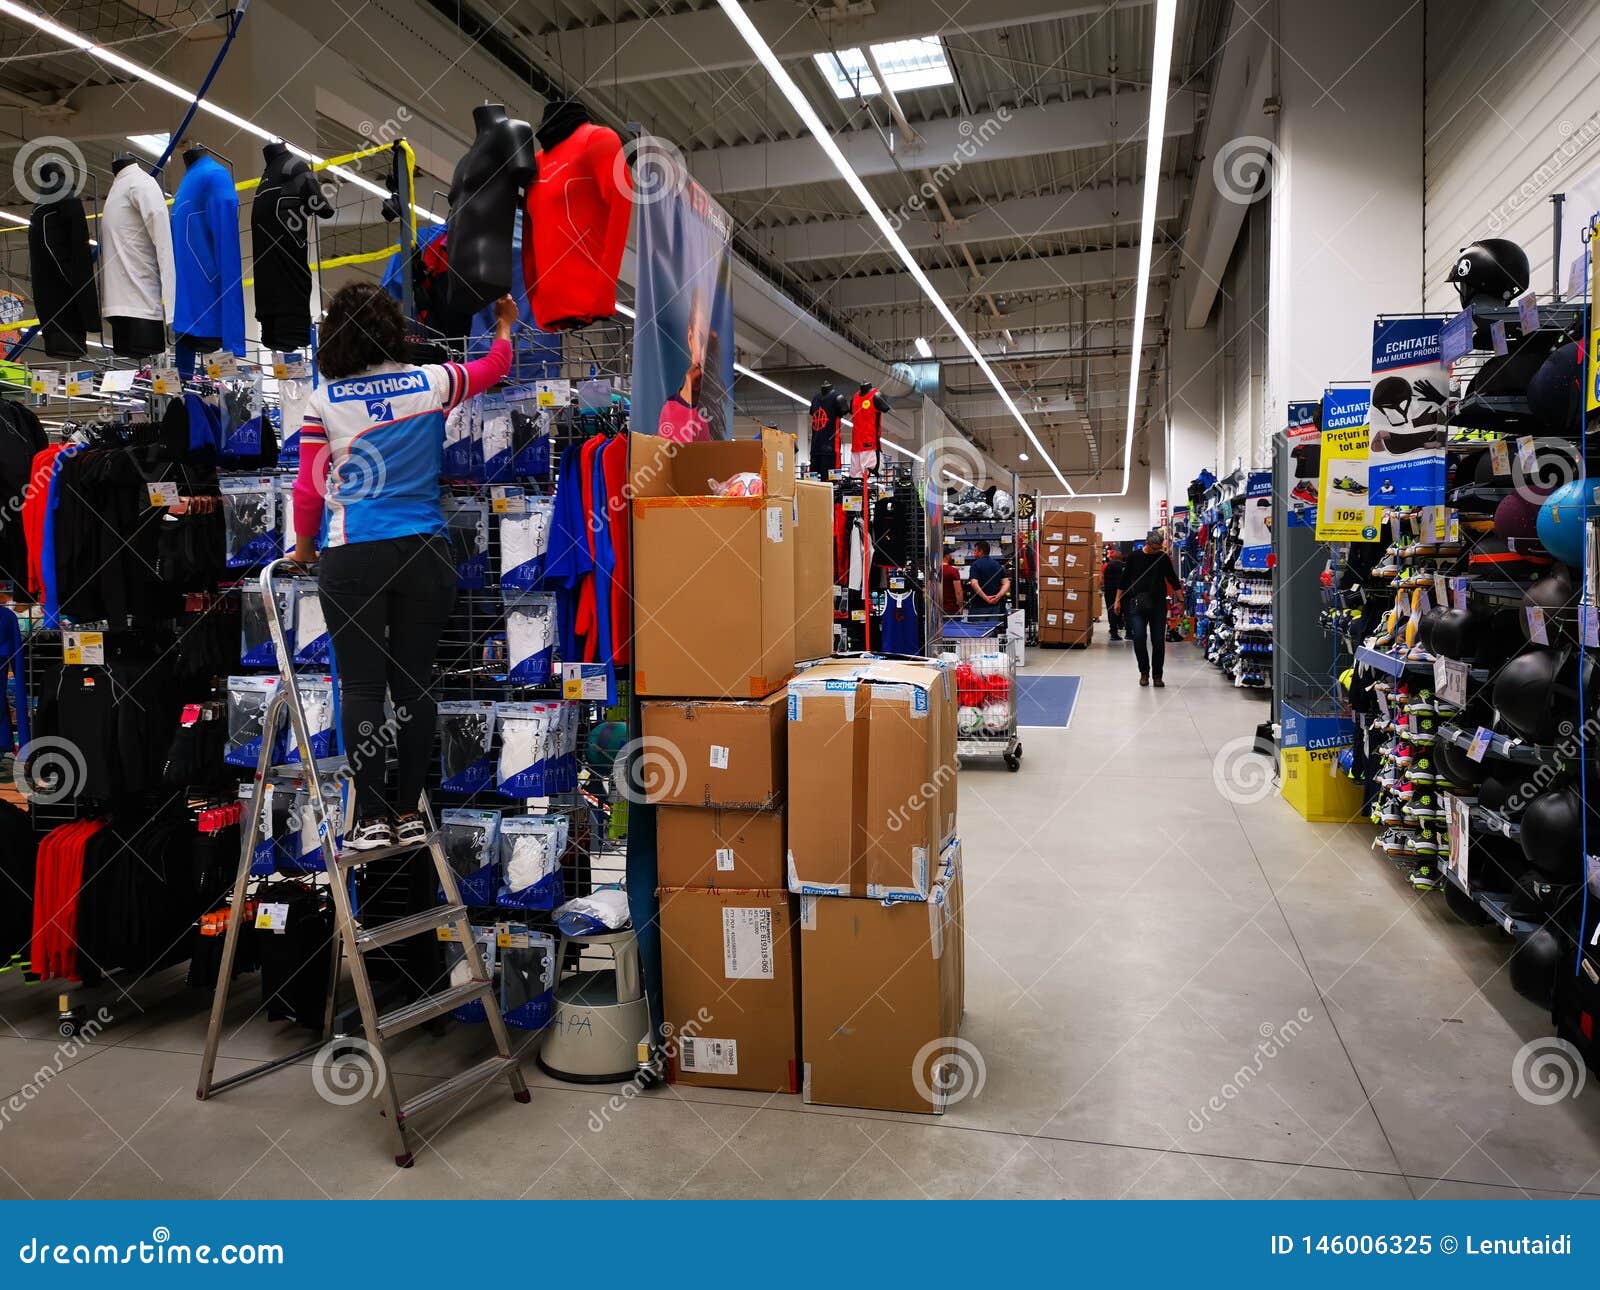 Commercial Worker Arranging the Products at Decathlon Editorial Image ...